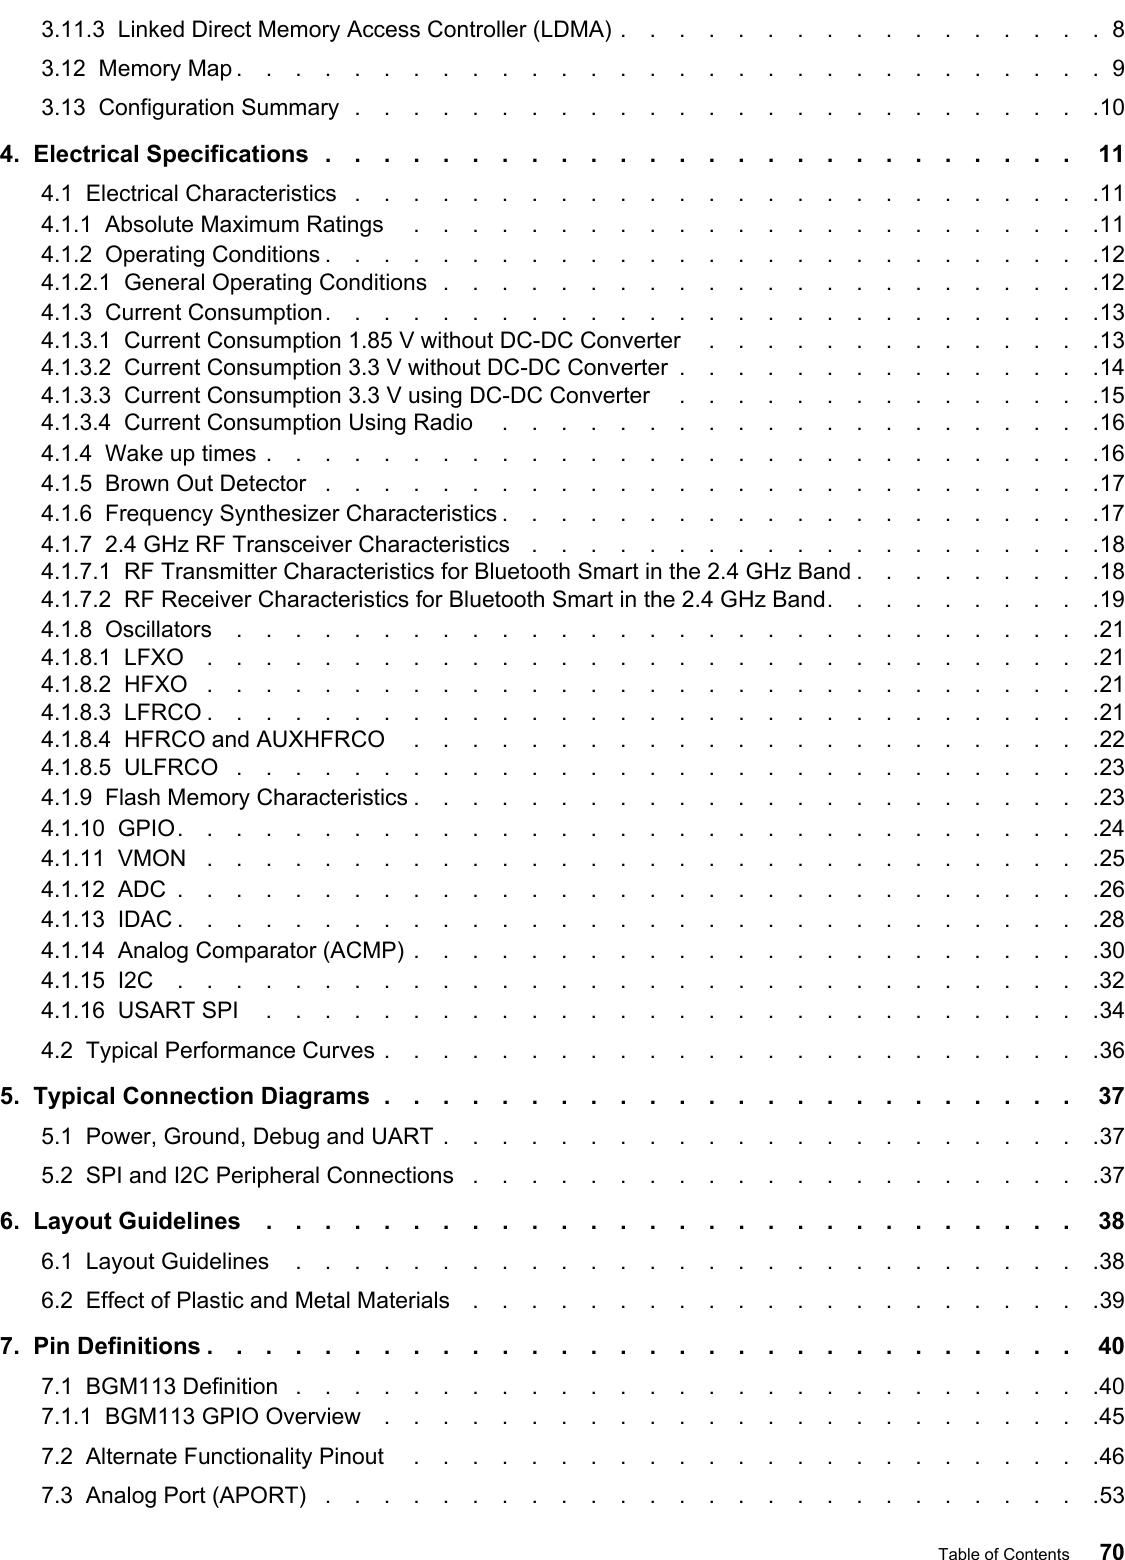 3.11.3  Linked Direct Memory Access Controller (LDMA) .................83.12  Memory Map ..............................93.13  Configuration Summary ..........................104.  Electrical Specifications .......................... 114.1  Electrical Characteristics ..........................114.1.1  Absolute Maximum Ratings ........................114.1.2  Operating Conditions ...........................124.1.2.1  General Operating Conditions .......................124.1.3  Current Consumption...........................134.1.3.1  Current Consumption 1.85 V without DC-DC Converter ..............134.1.3.2  Current Consumption 3.3 V without DC-DC Converter ...............144.1.3.3  Current Consumption 3.3 V using DC-DC Converter ...............154.1.3.4  Current Consumption Using Radio .....................164.1.4  Wake up times .............................164.1.5  Brown Out Detector ...........................174.1.6  Frequency Synthesizer Characteristics .....................174.1.7  2.4 GHz RF Transceiver Characteristics ....................184.1.7.1  RF Transmitter Characteristics for Bluetooth Smart in the 2.4 GHz Band .........184.1.7.2  RF Receiver Characteristics for Bluetooth Smart in the 2.4 GHz Band..........194.1.8  Oscillators ..............................214.1.8.1  LFXO ...............................214.1.8.2  HFXO ...............................214.1.8.3  LFRCO ...............................214.1.8.4  HFRCO and AUXHFRCO ........................224.1.8.5  ULFRCO ..............................234.1.9  Flash Memory Characteristics ........................234.1.10  GPIO................................244.1.11  VMON ...............................254.1.12  ADC ................................264.1.13  IDAC ................................284.1.14  Analog Comparator (ACMP) ........................304.1.15  I2C ................................324.1.16  USART SPI .............................344.2  Typical Performance Curves .........................365.  Typical Connection Diagrams ........................ 375.1  Power, Ground, Debug and UART .......................375.2  SPI and I2C Peripheral Connections ......................376.  Layout Guidelines ............................ 386.1  Layout Guidelines ............................386.2  Effect of Plastic and Metal Materials ......................397.  Pin Definitions .............................. 407.1  BGM113 Definition ............................407.1.1  BGM113 GPIO Overview .........................457.2  Alternate Functionality Pinout ........................467.3  Analog Port (APORT) ...........................53Table of Contents 70